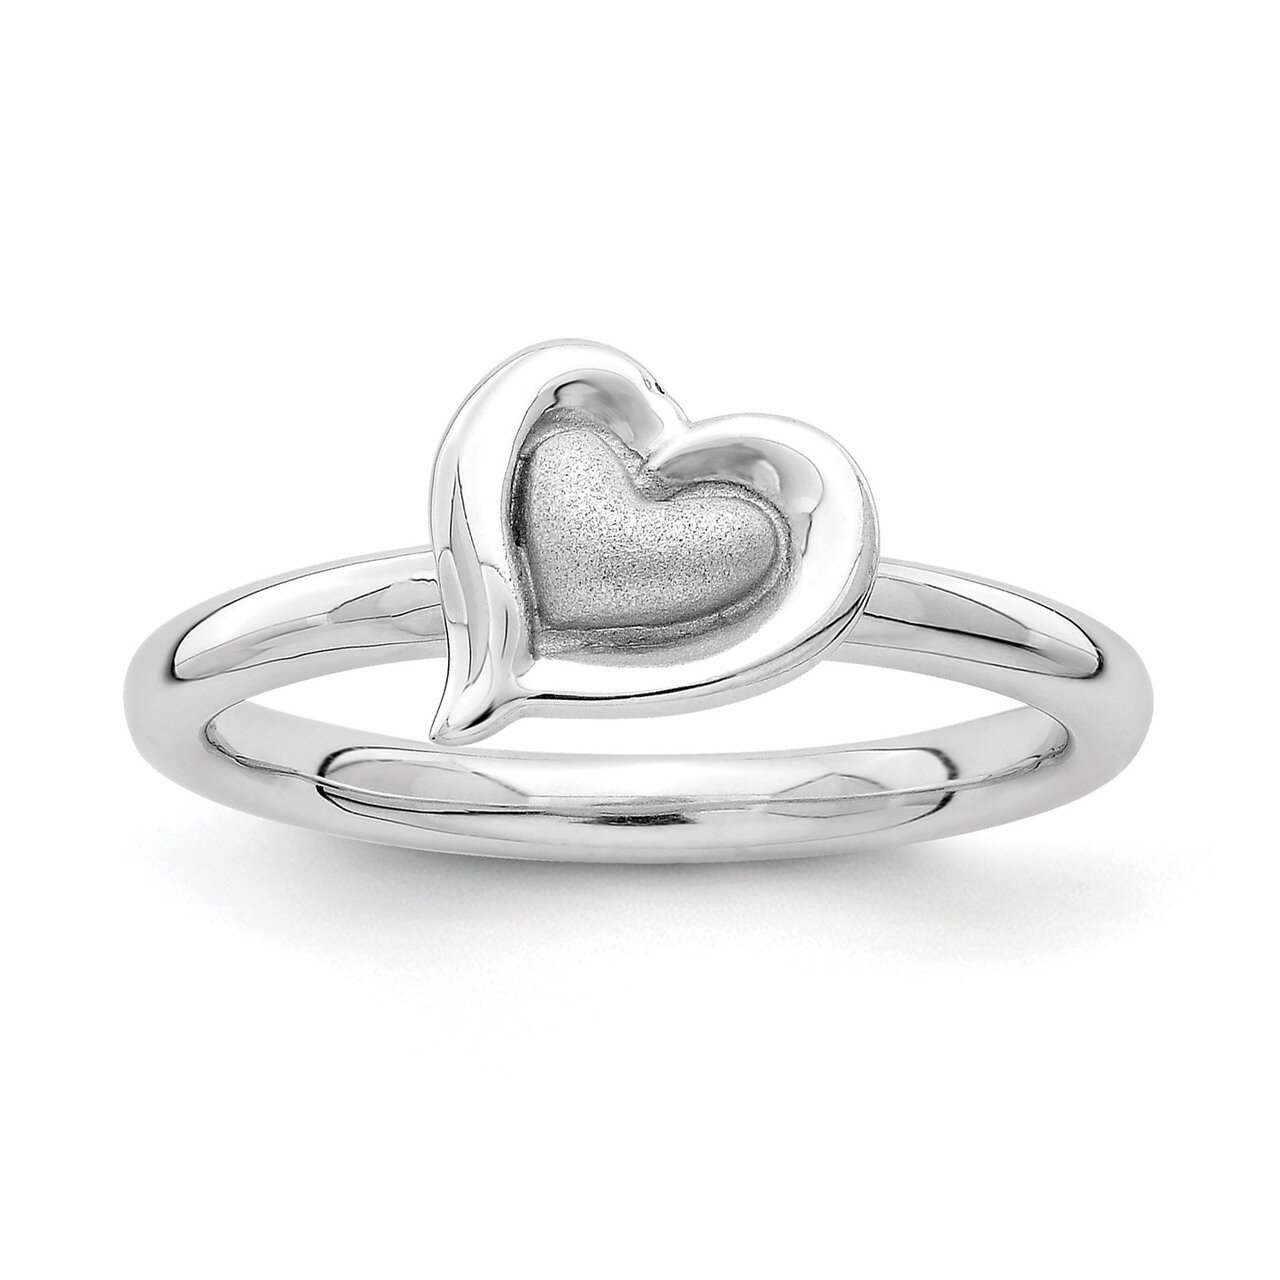 Heart Ring - Sterling Silver Rhodium-plated QSK1623